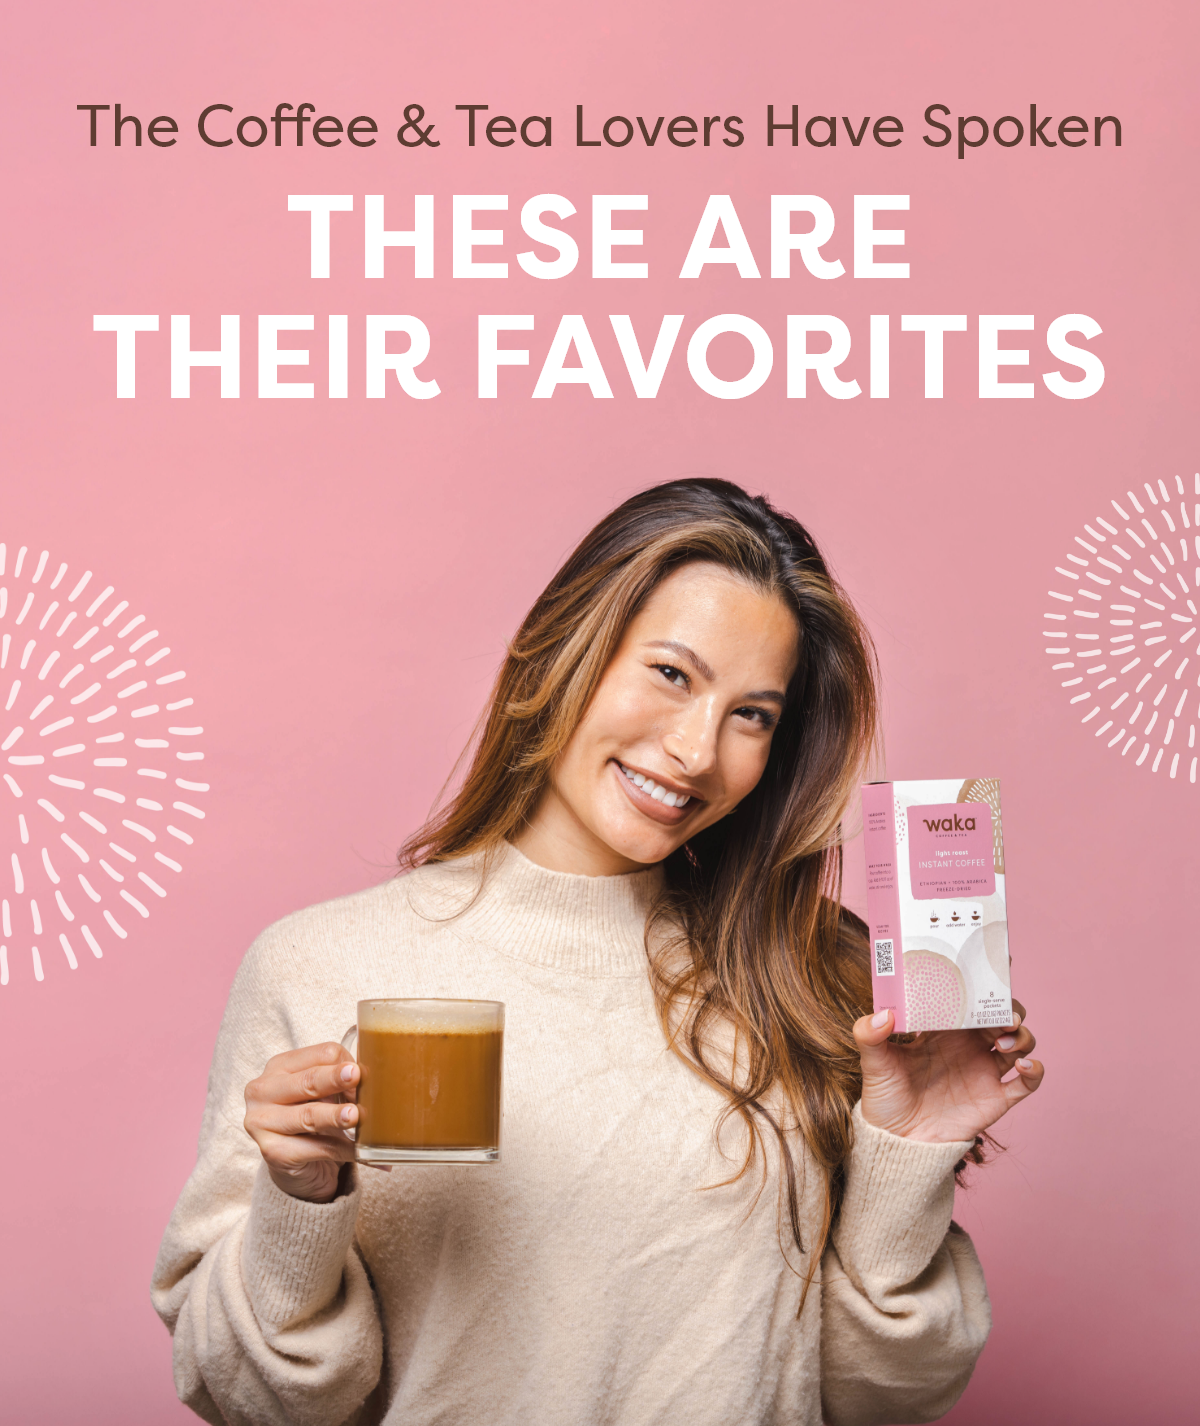 The Coffee & Tea Lovers Have Spoken These Are their Favorites